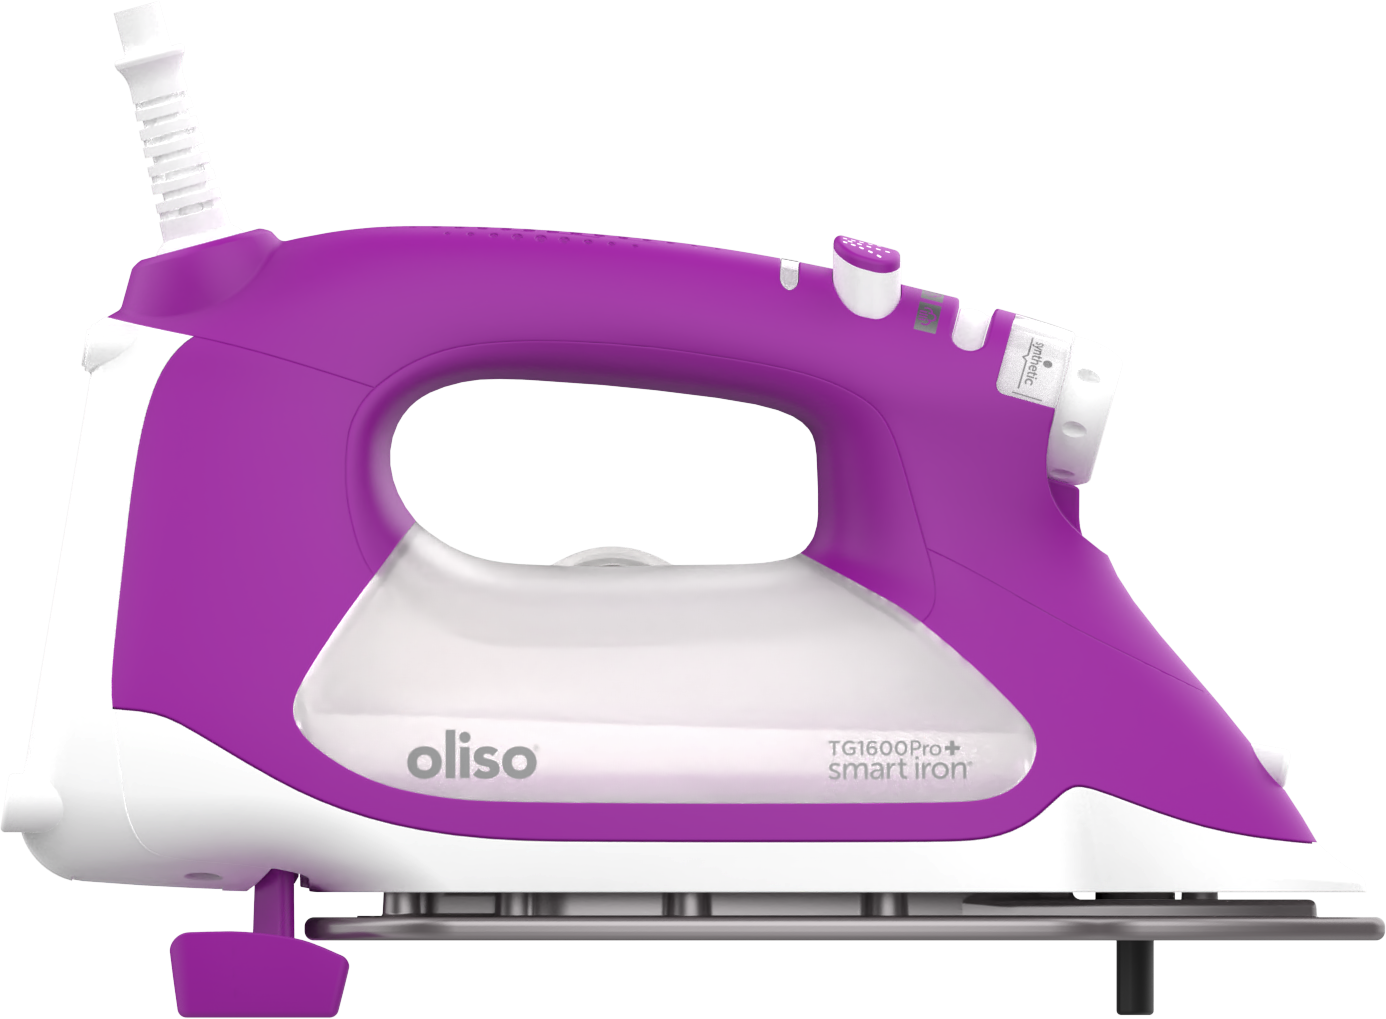 Oliso ProPlus purple  Smart iron  with its auto-lift legs extended, raising it above  fabric and ironing surfaces.